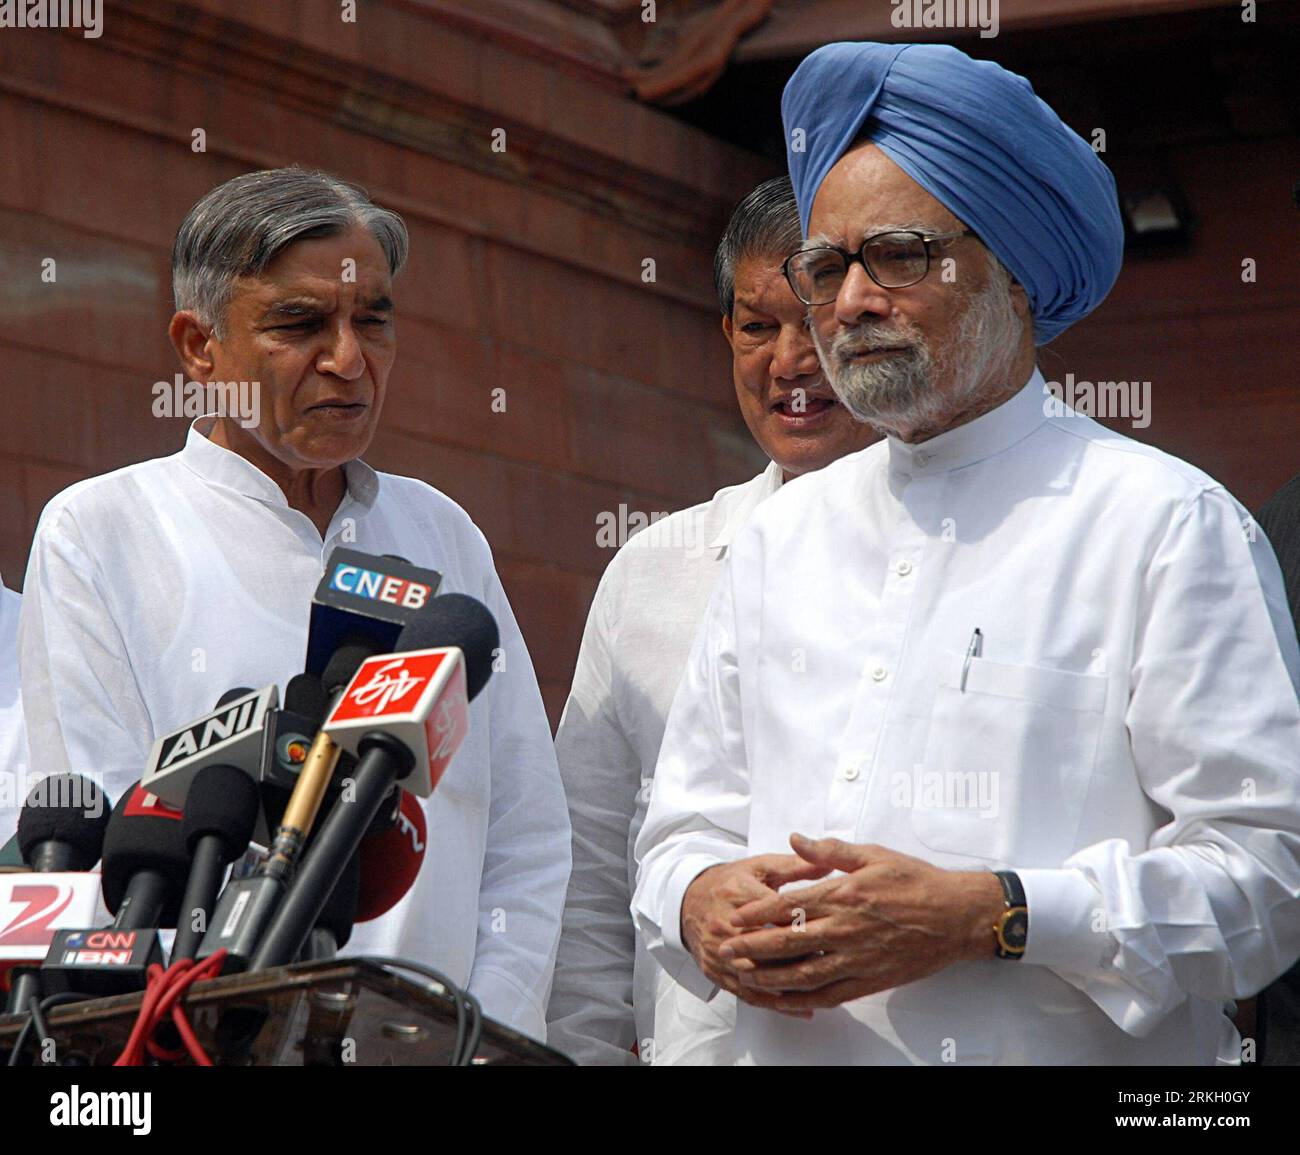 Bildnummer: 55672412  Datum: 01.08.2011  Copyright: imago/Xinhua (110801) -- NEW DELHI, Aug. 1, 2011 (Xinhua) -- Indian Prime Minister Manmohan Singh (1st R) talks to the media on his arrival at the first day of monsoon session of Parliament, in New Delhi, India, Aug. 1, 2011. Manmohan Singh Monday appealed to opposition parties to come together and tackle problems facing the country. (Xinhua/Partha Sarkar)(axy) INDIA-NEW DELHI-MANMOHAN SINGH PUBLICATIONxNOTxINxCHN People Politik xdp x0x premiumd 2011 quadrat     Bildnummer 55672412 Date 01 08 2011 Copyright Imago XINHUA  New Delhi Aug 1 2011 Stock Photo